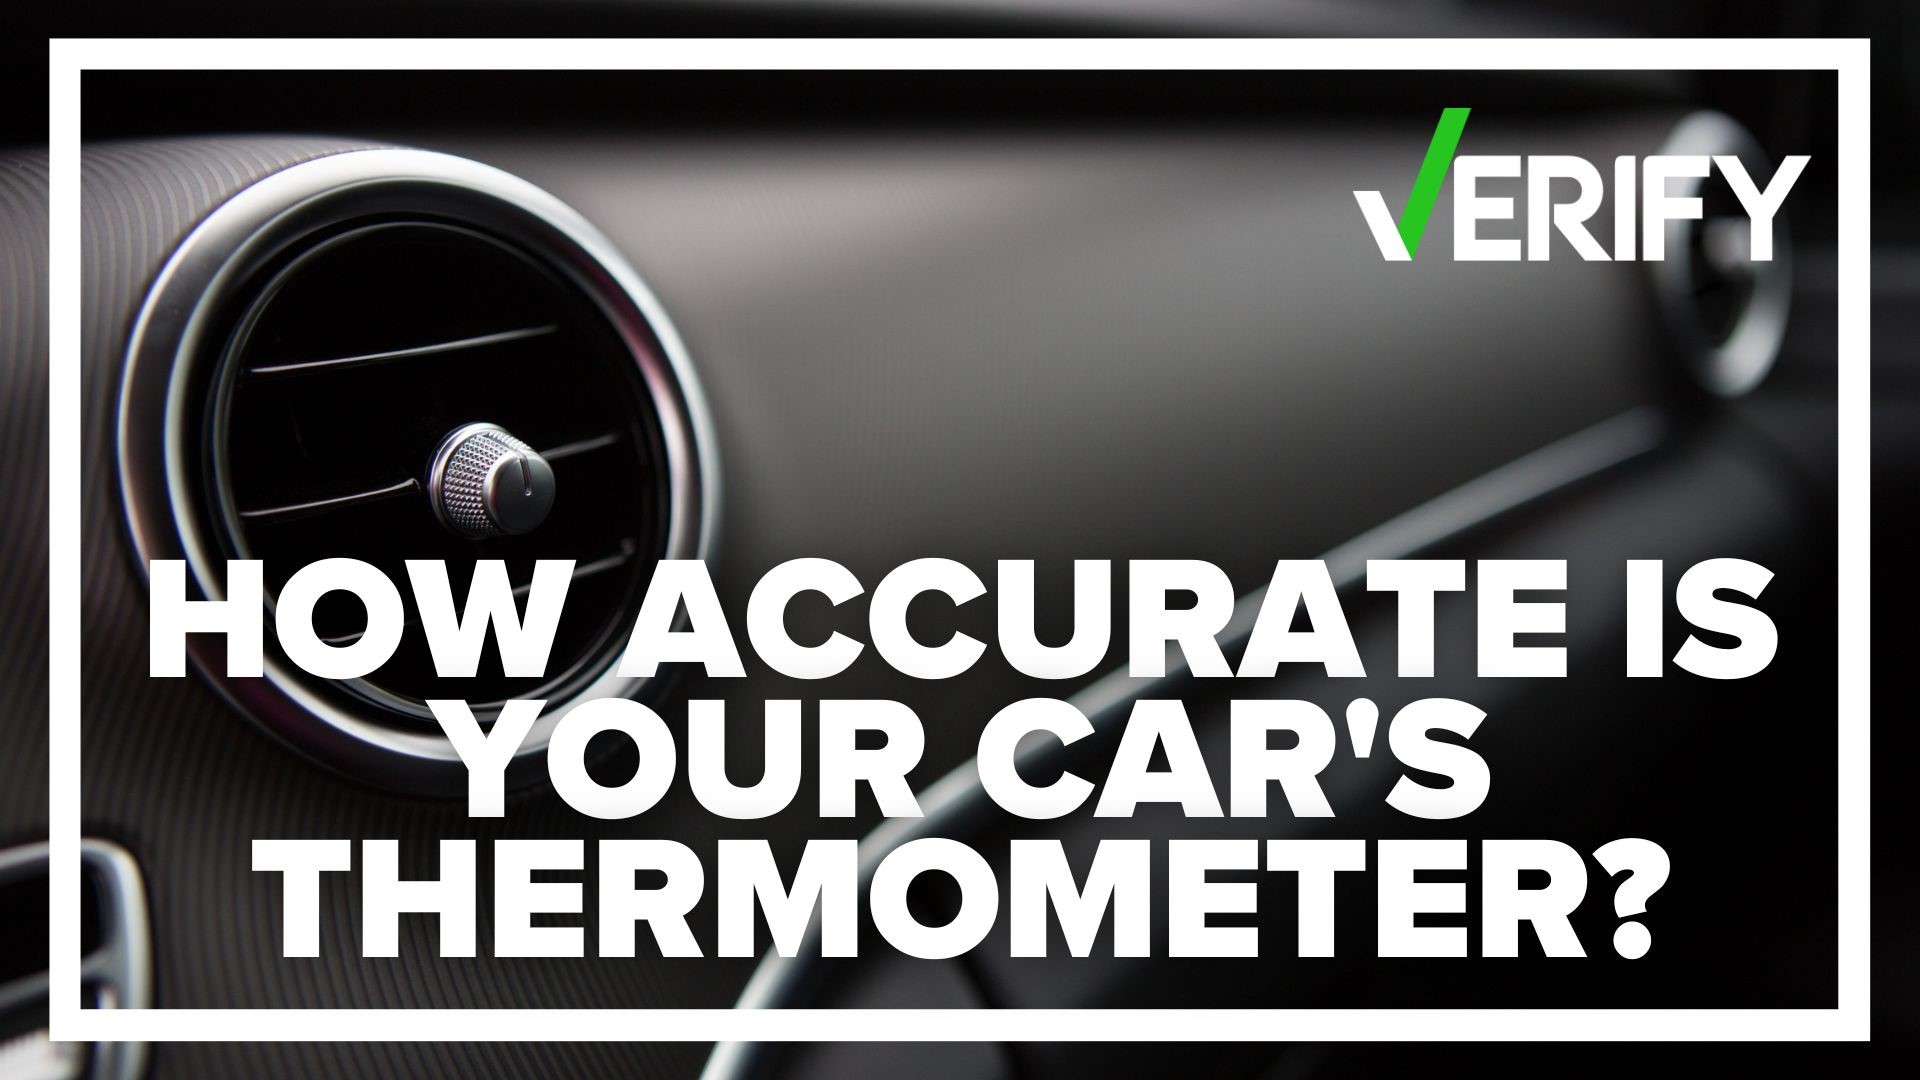 With just a few weeks of hot weather left, you might look to your car's dash for the temperature. But how accurate is that thermometer?